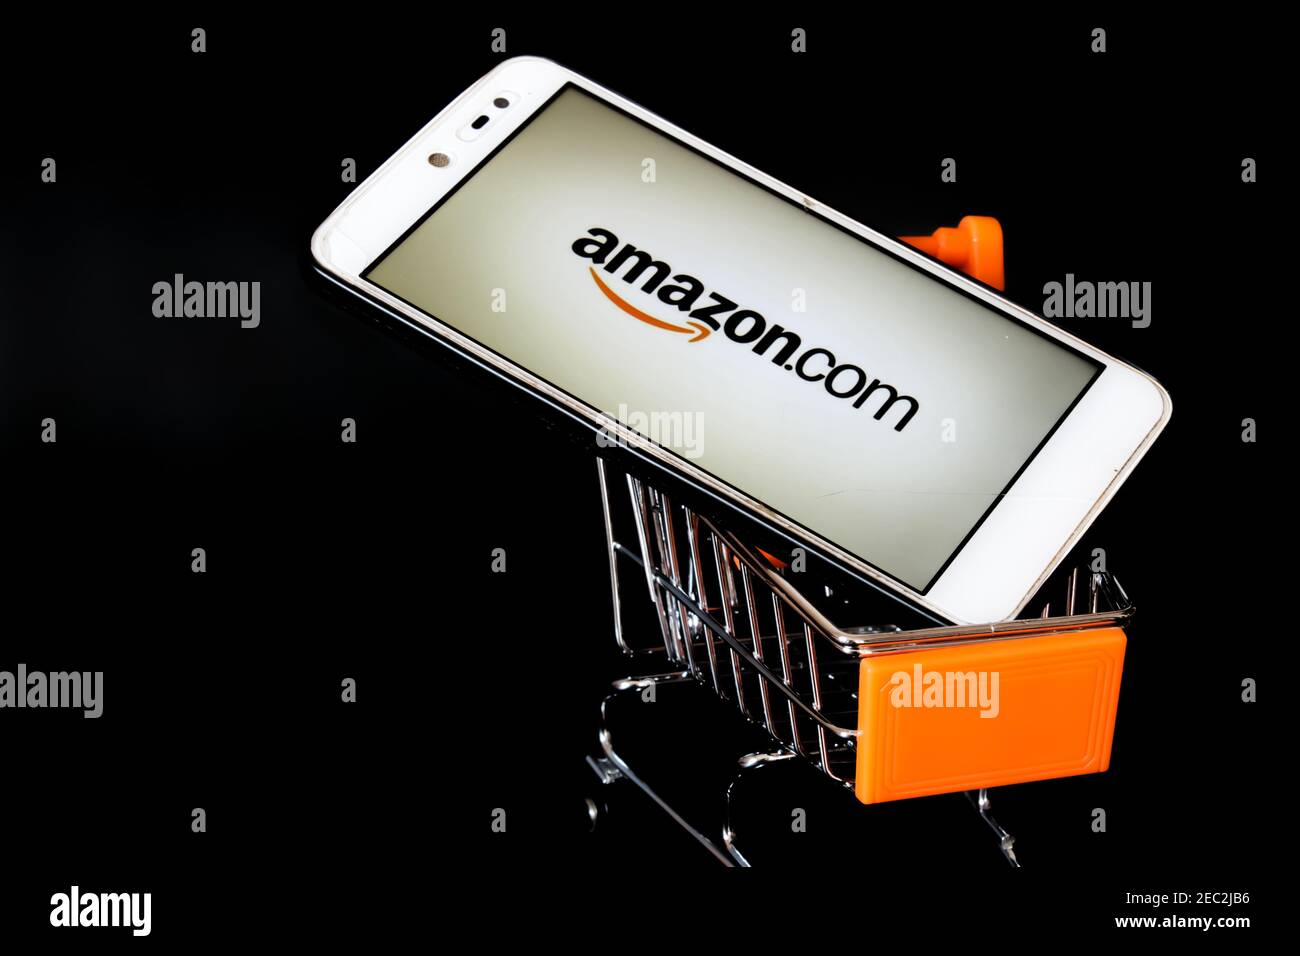 Amazon Online Shop High Resolution Stock Photography and Images - Alamy